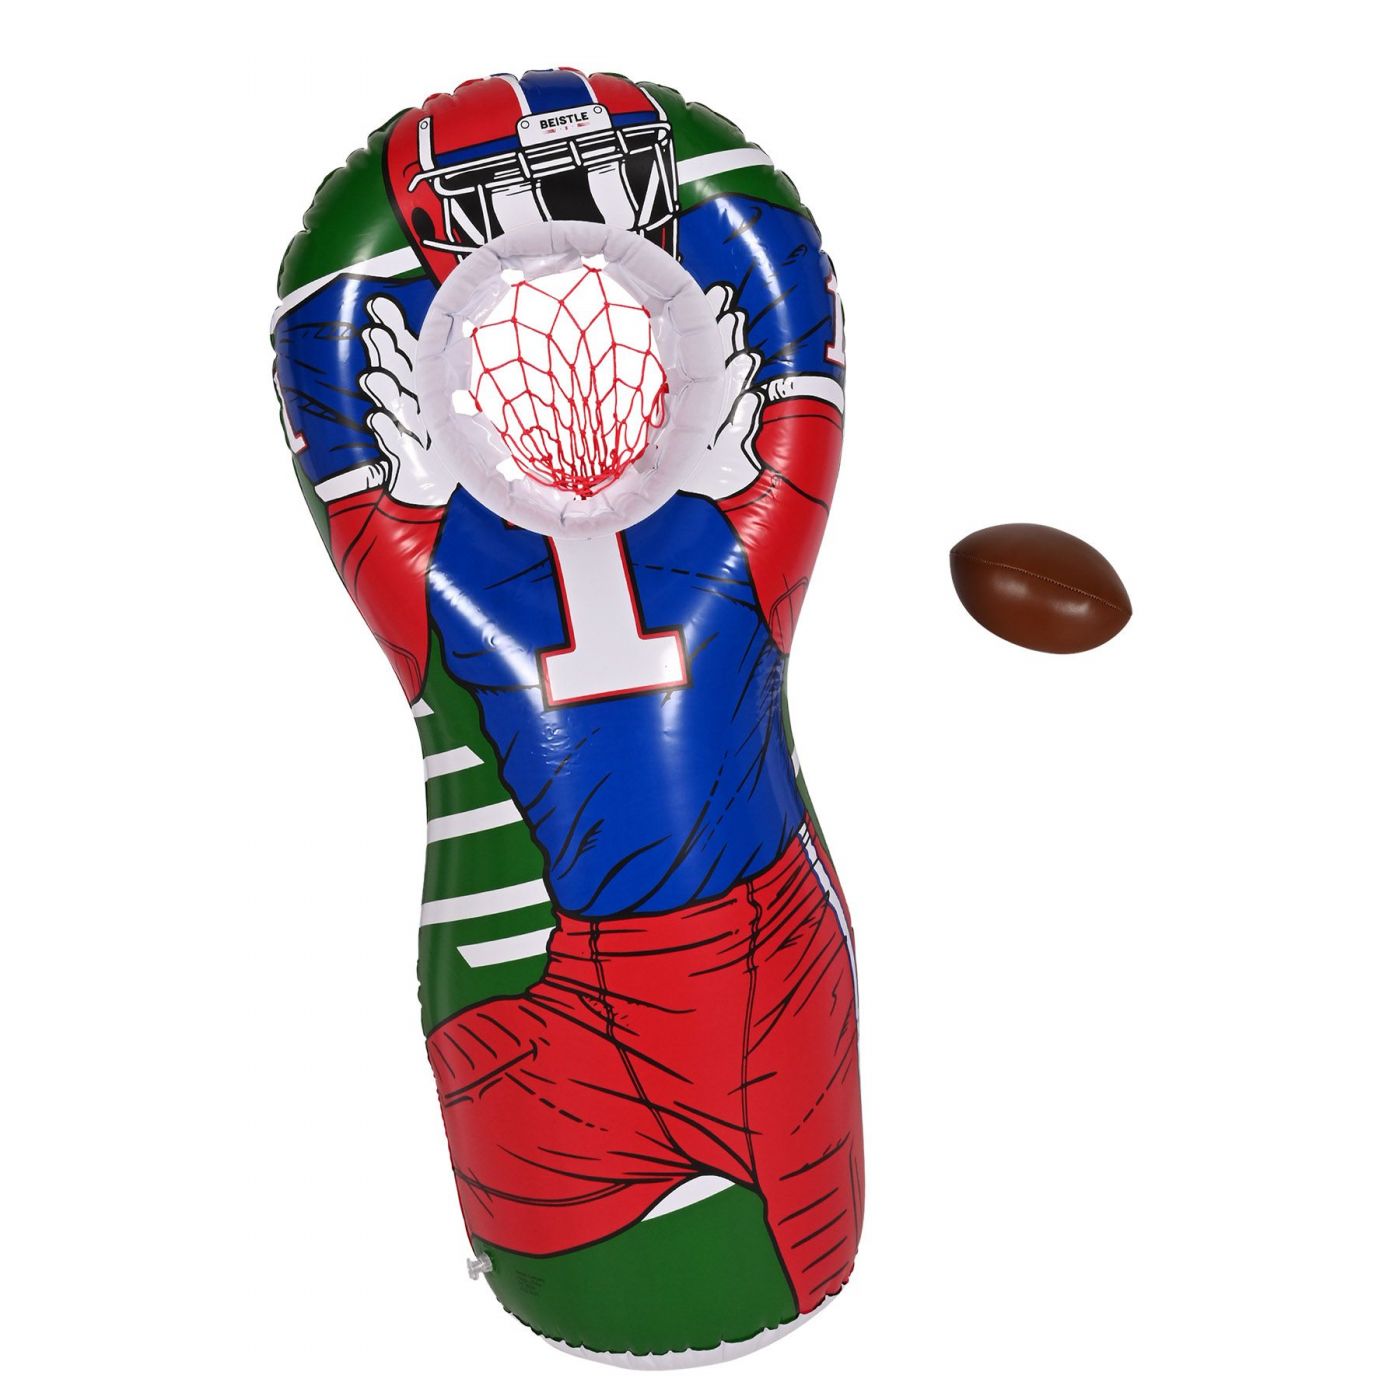 Inflatable Football Player Target Game (1) image